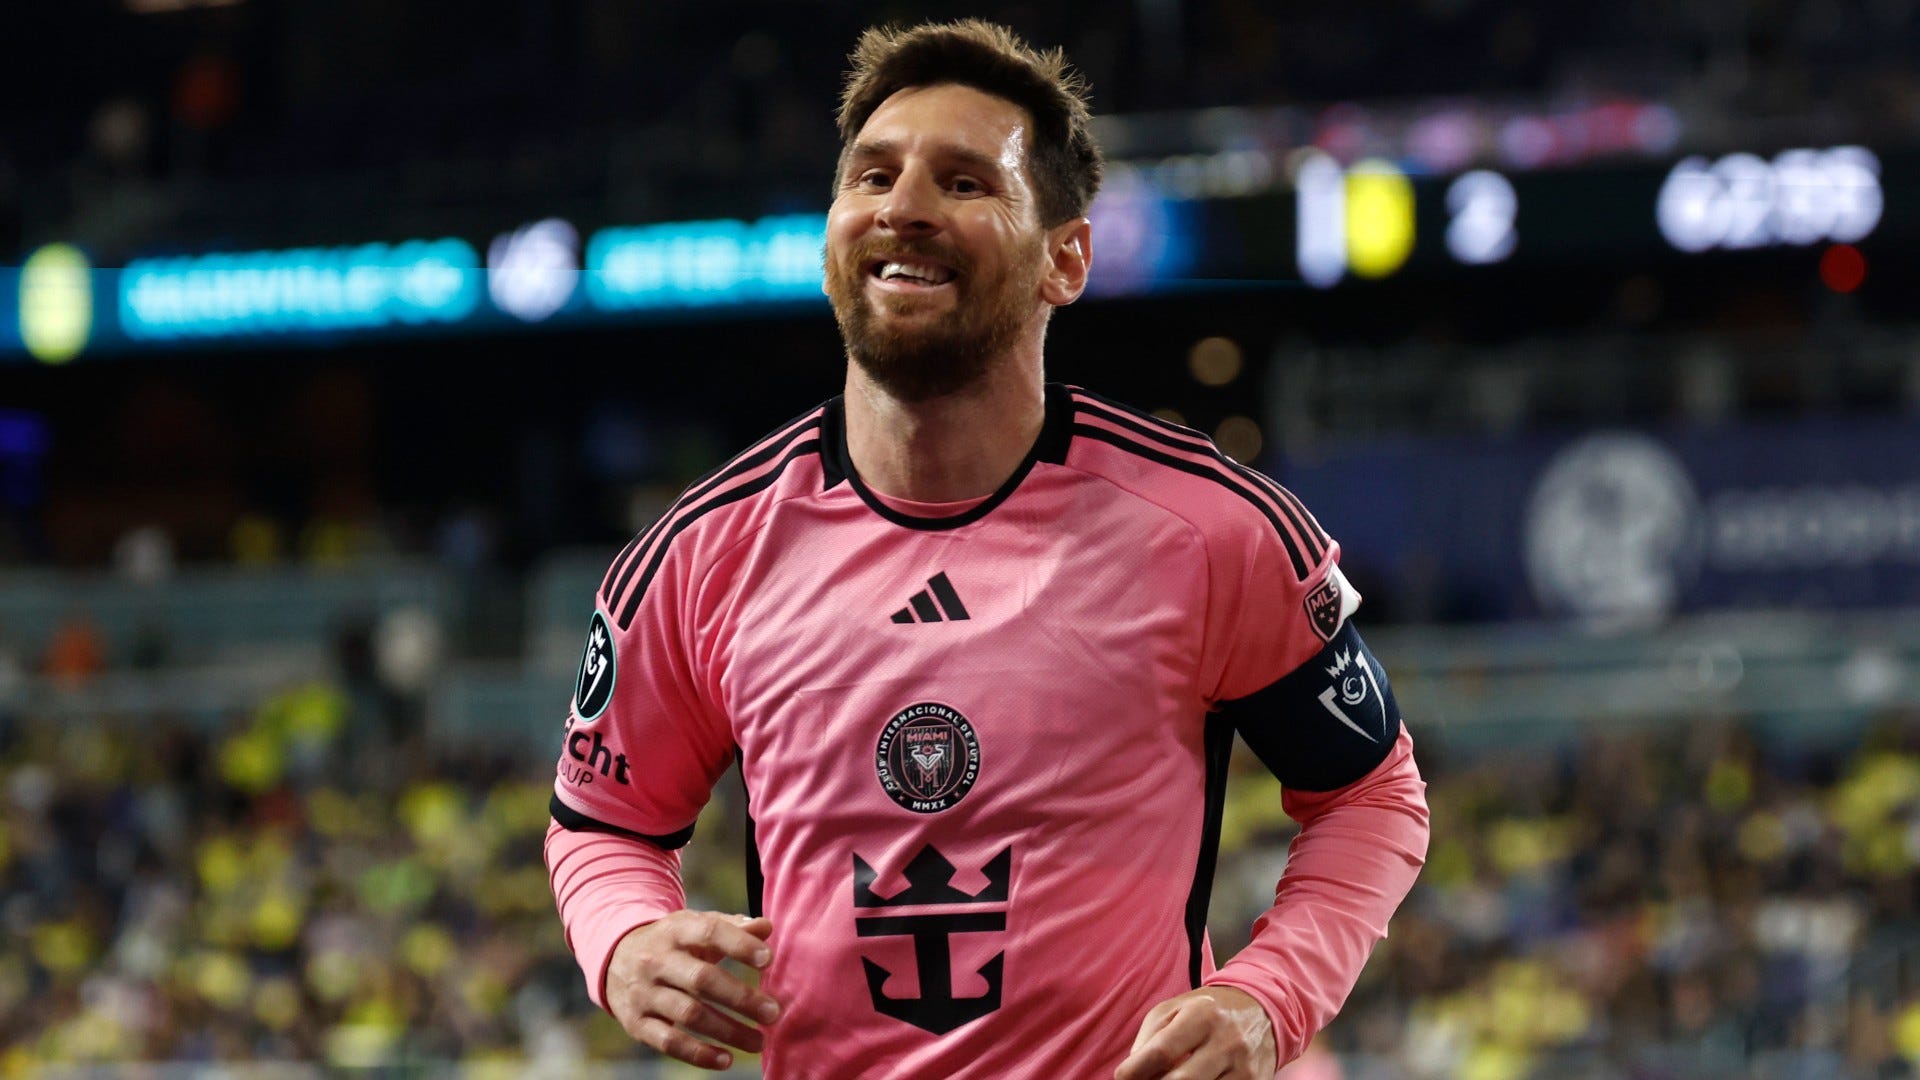 Lionel Messi 'learning a lot' about NFL after Inter Miami transfer as he reveals his four favorite sports after soccer